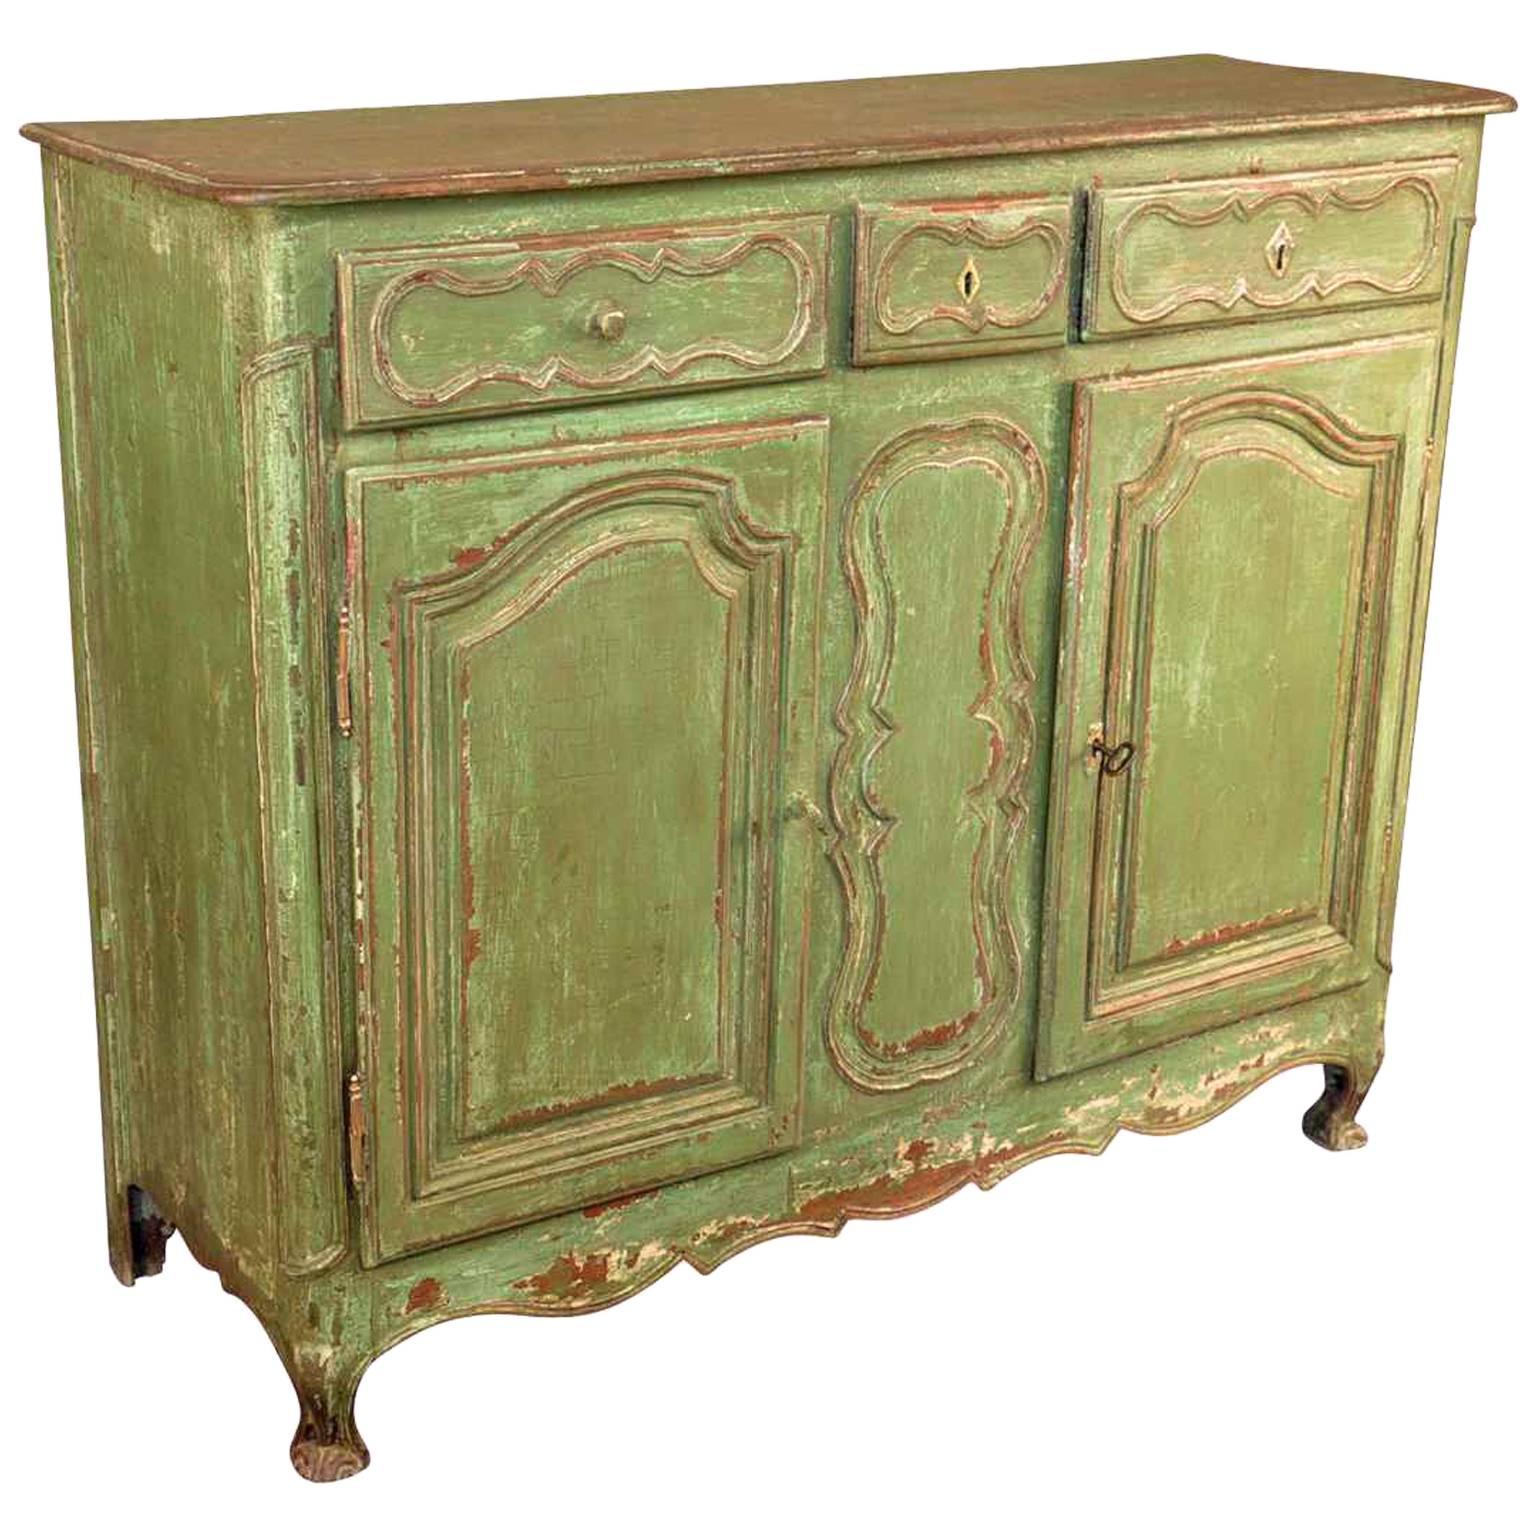 French Provencal 18th Century Buffet in Painted Wood